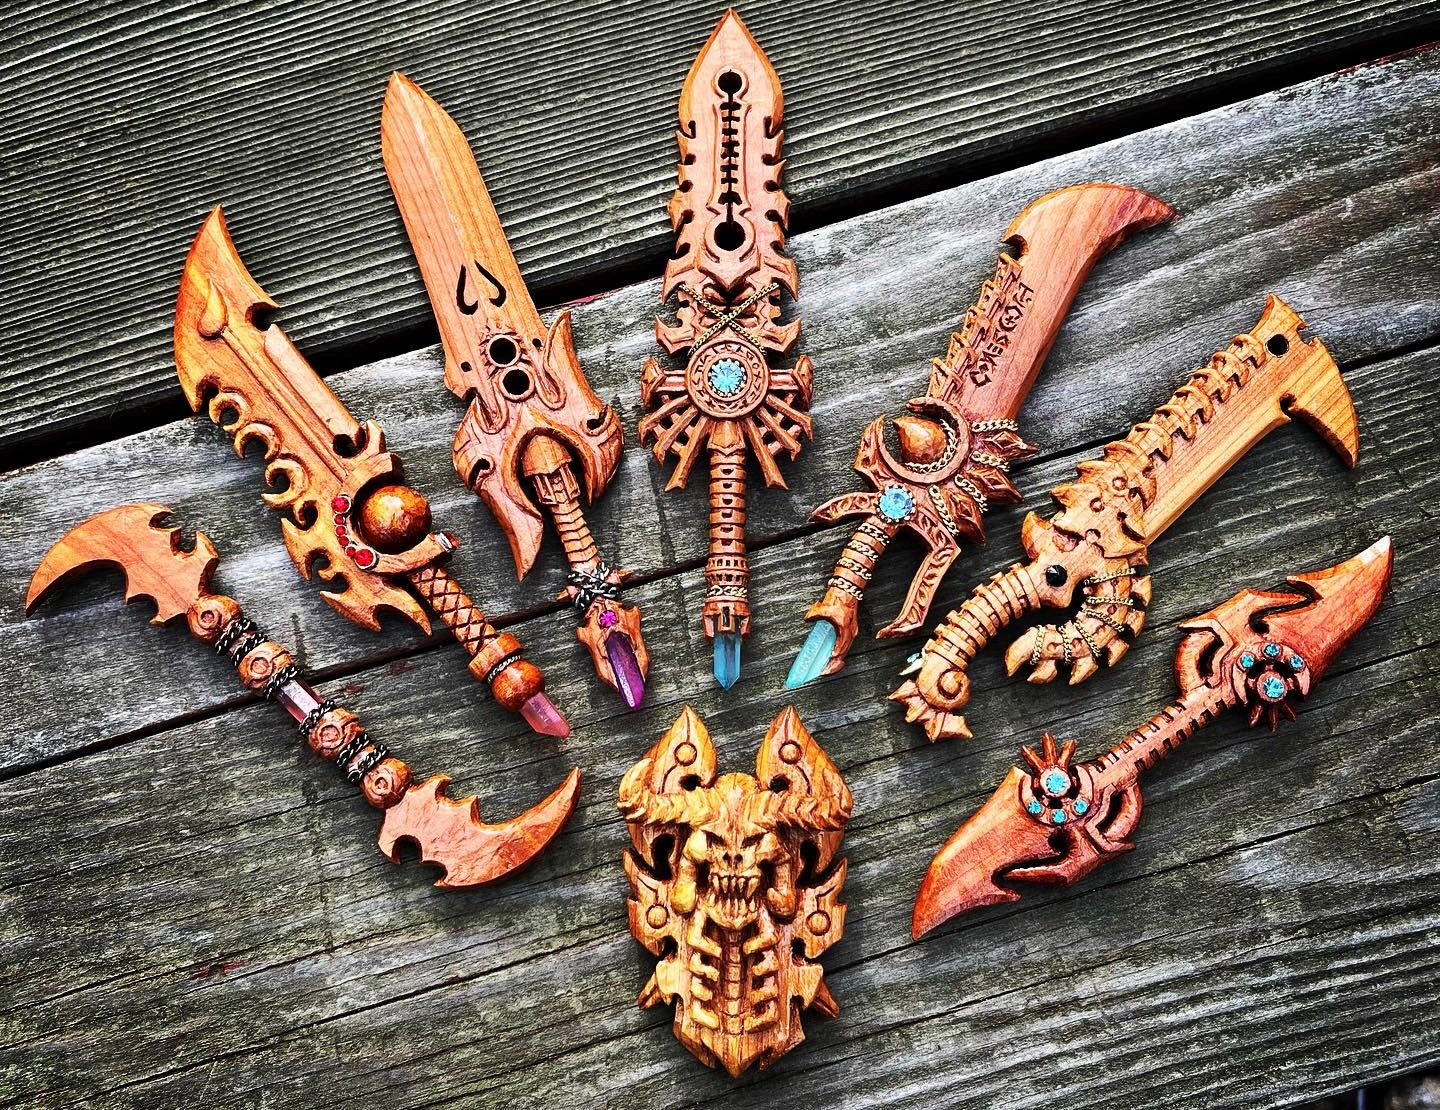 Fantasy weapons wood carving